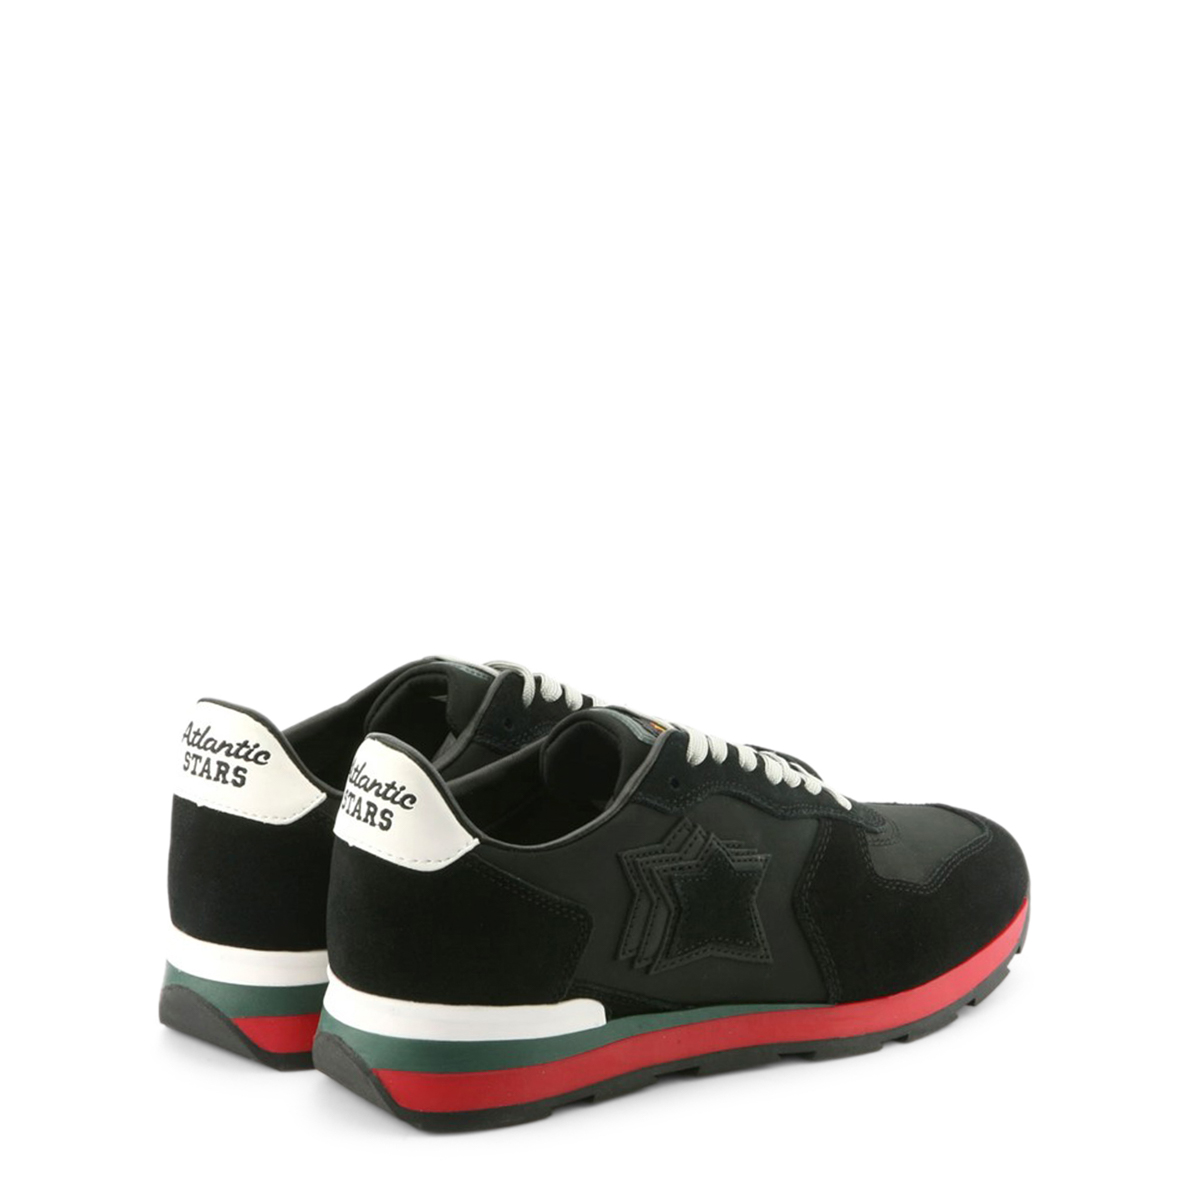 Fabric and Suede Sneakers with Rubber Sole